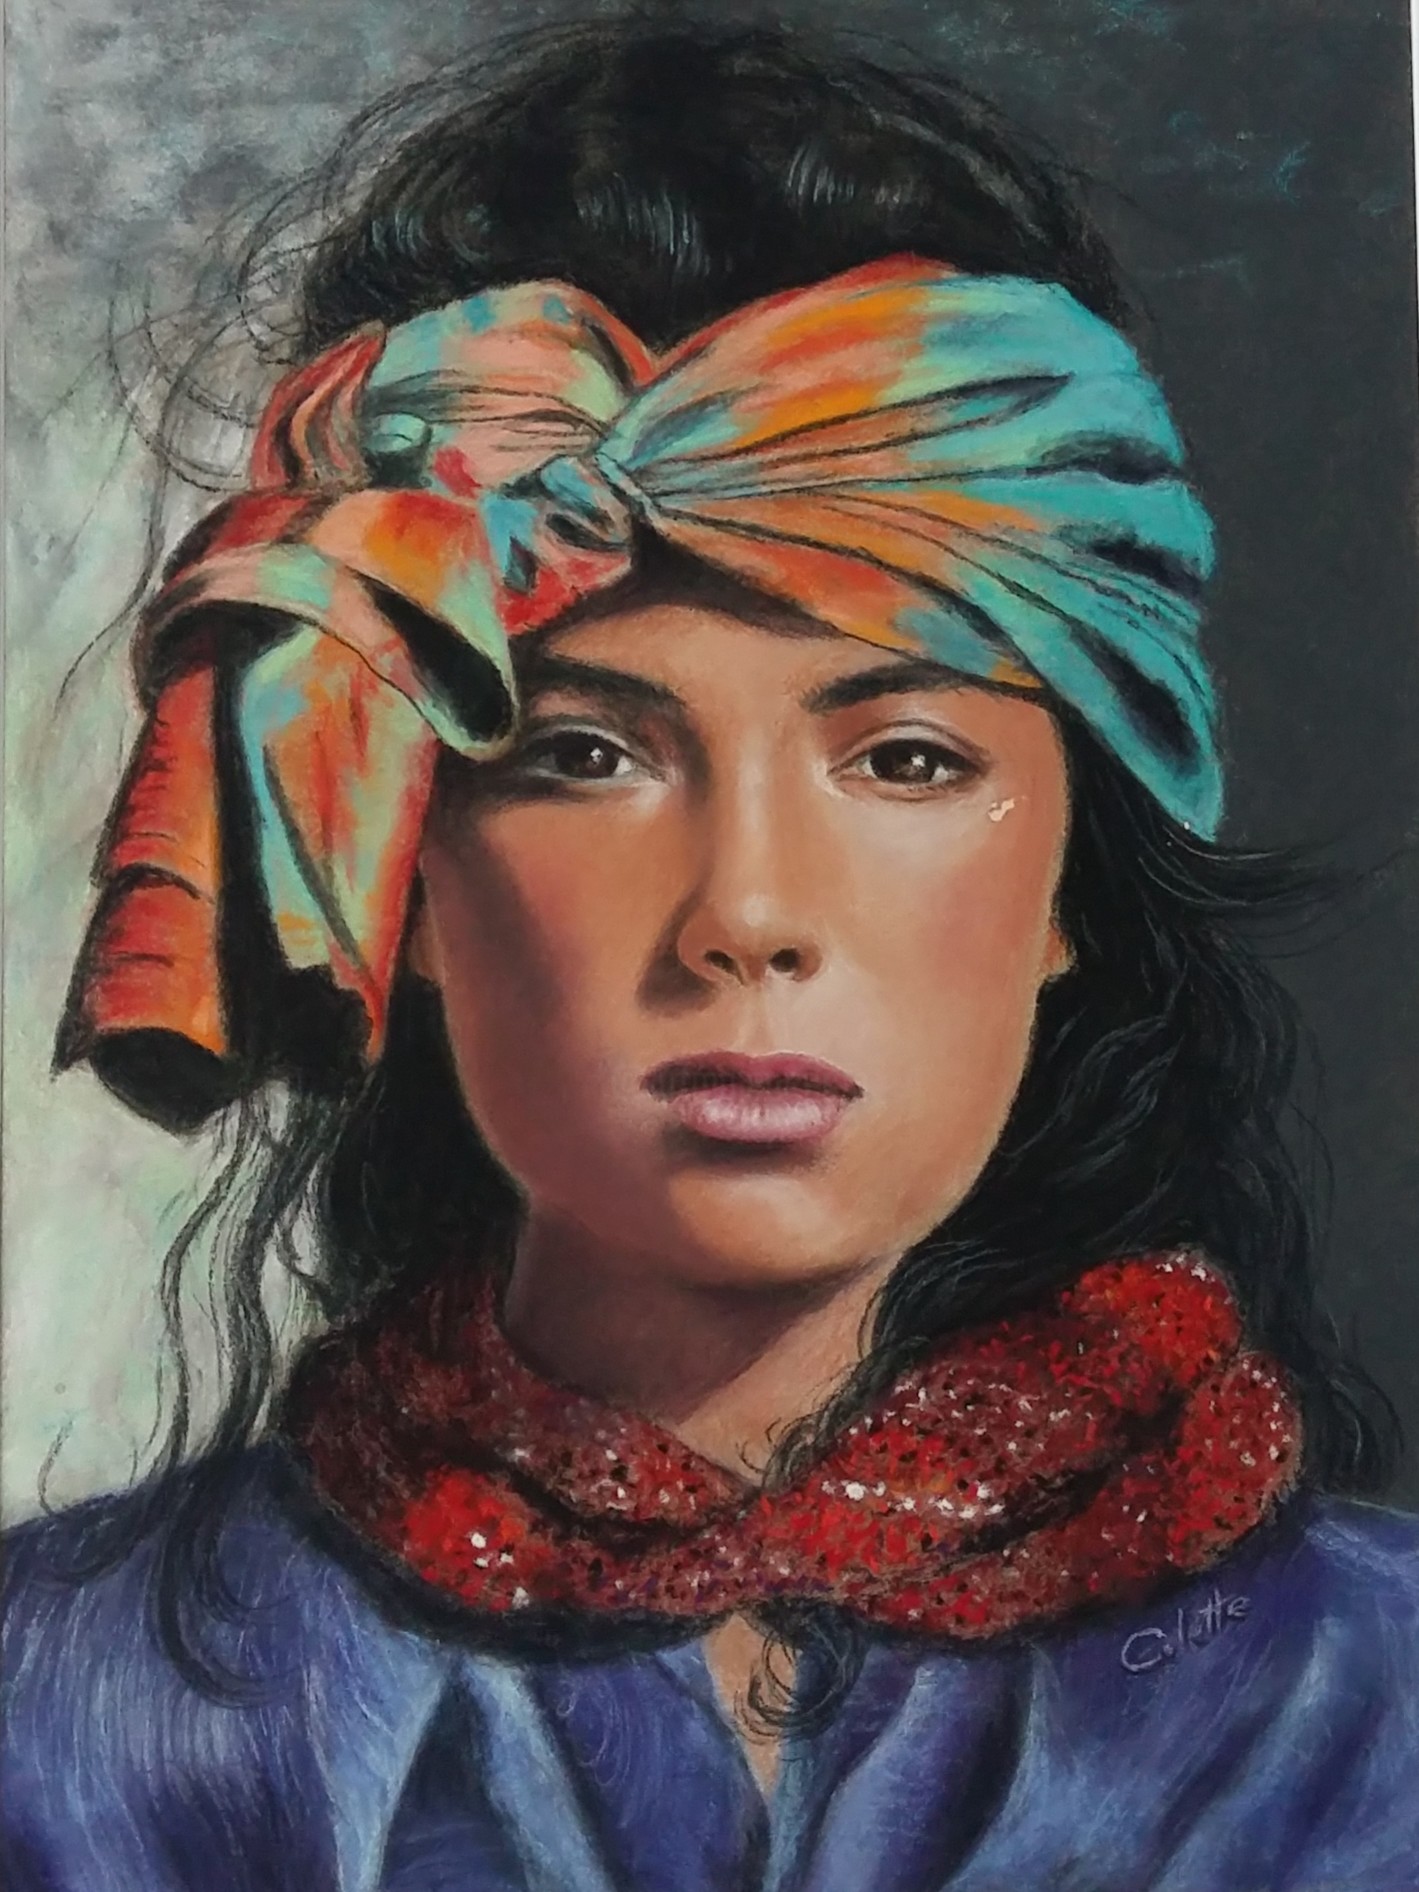 Gypsy Women Drawing : Here presented 53+ gypsy woman drawing images for ...